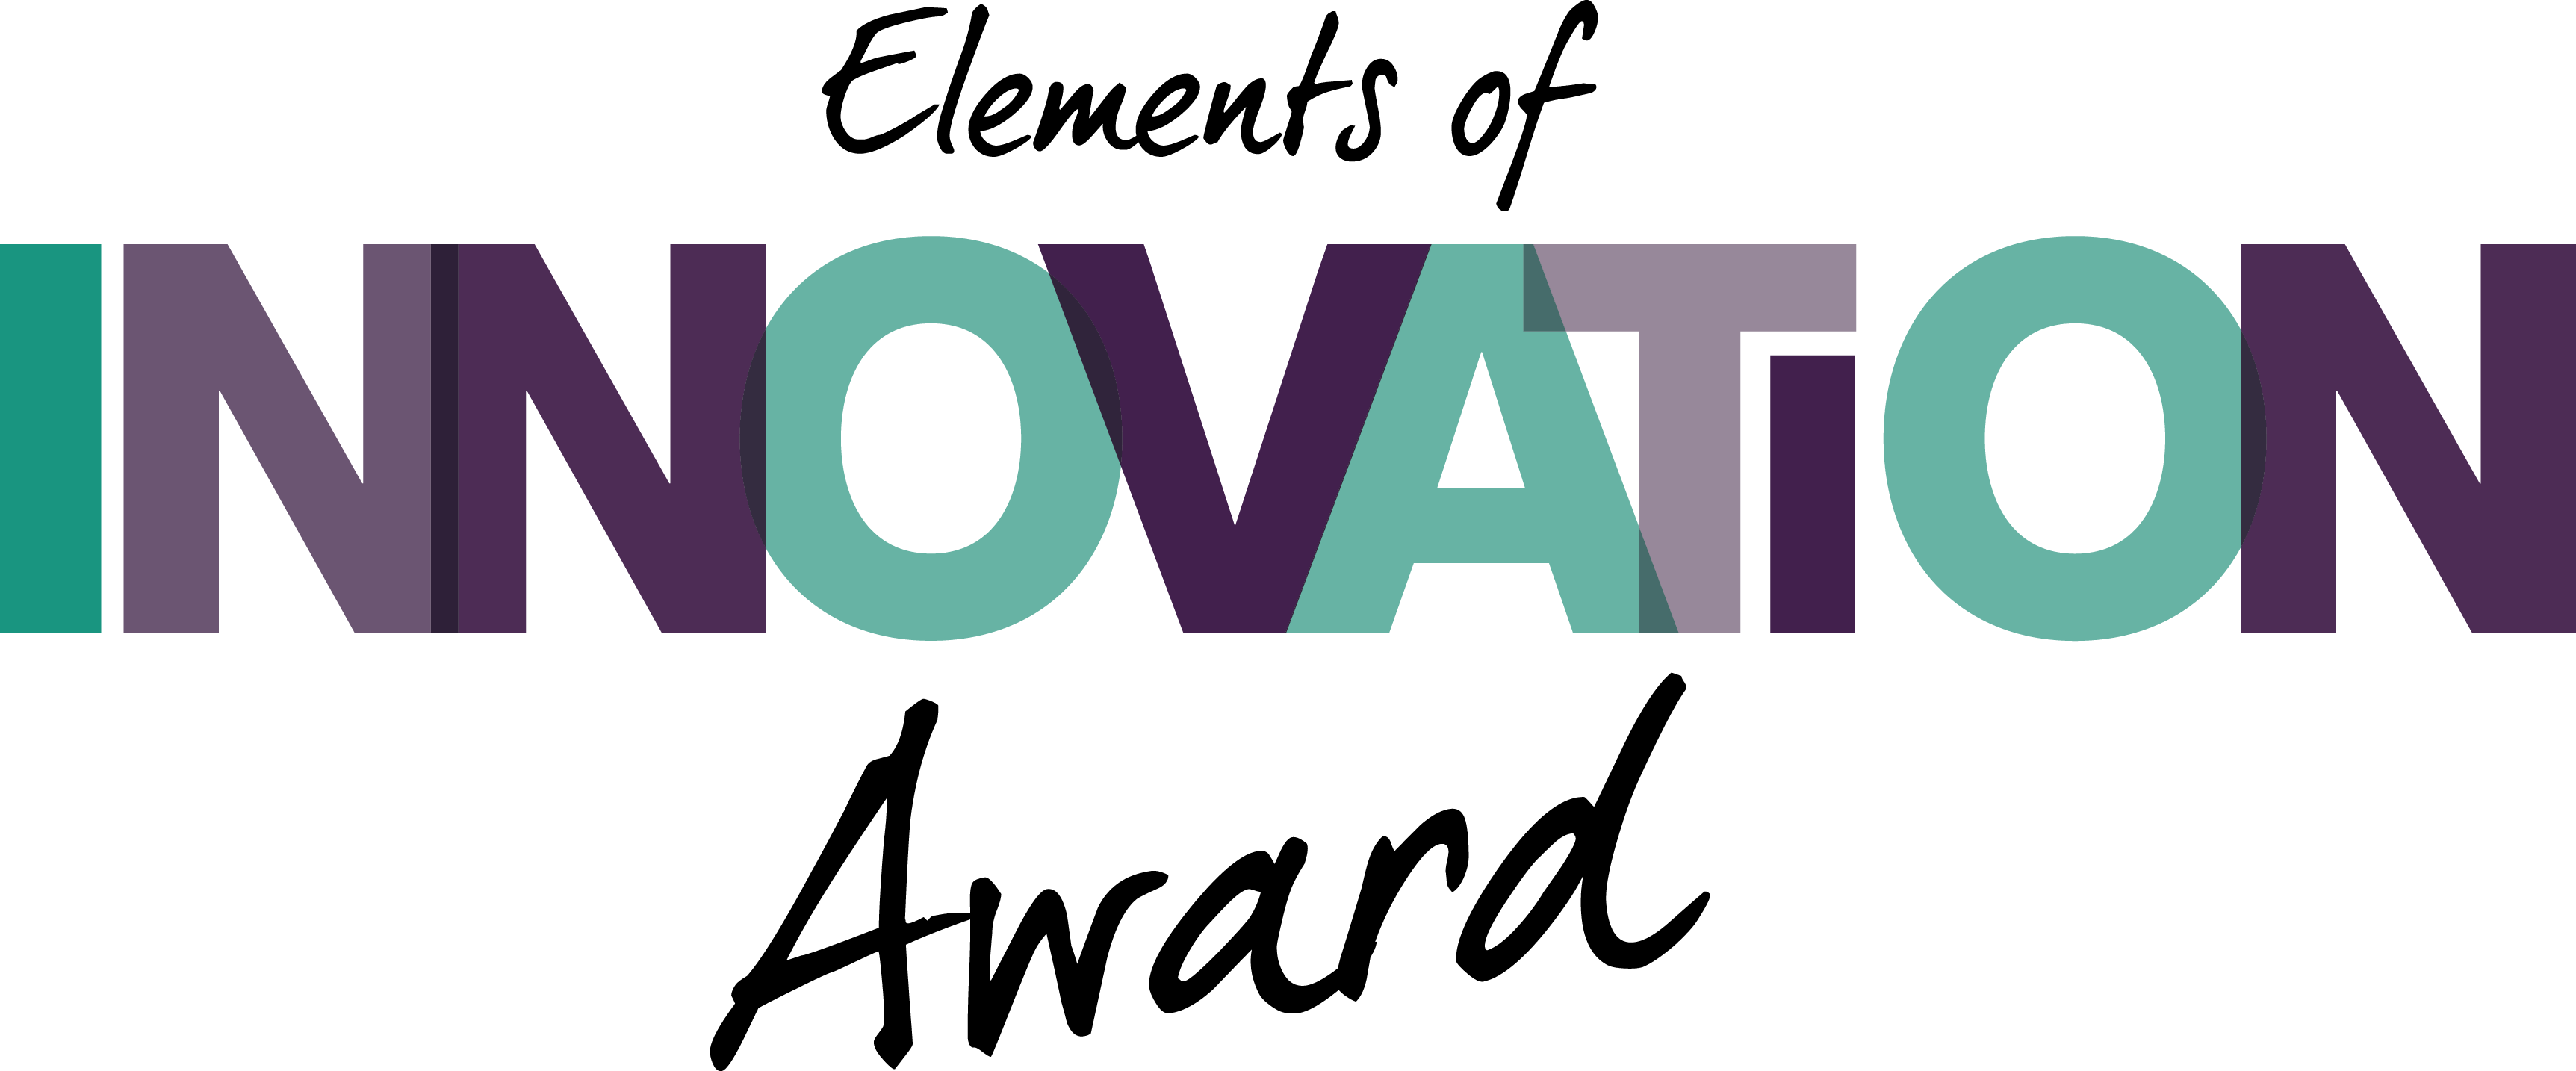 Elements Furniture Logo - W Exhibition - Finalists Announced For Elements Of Innovation Award